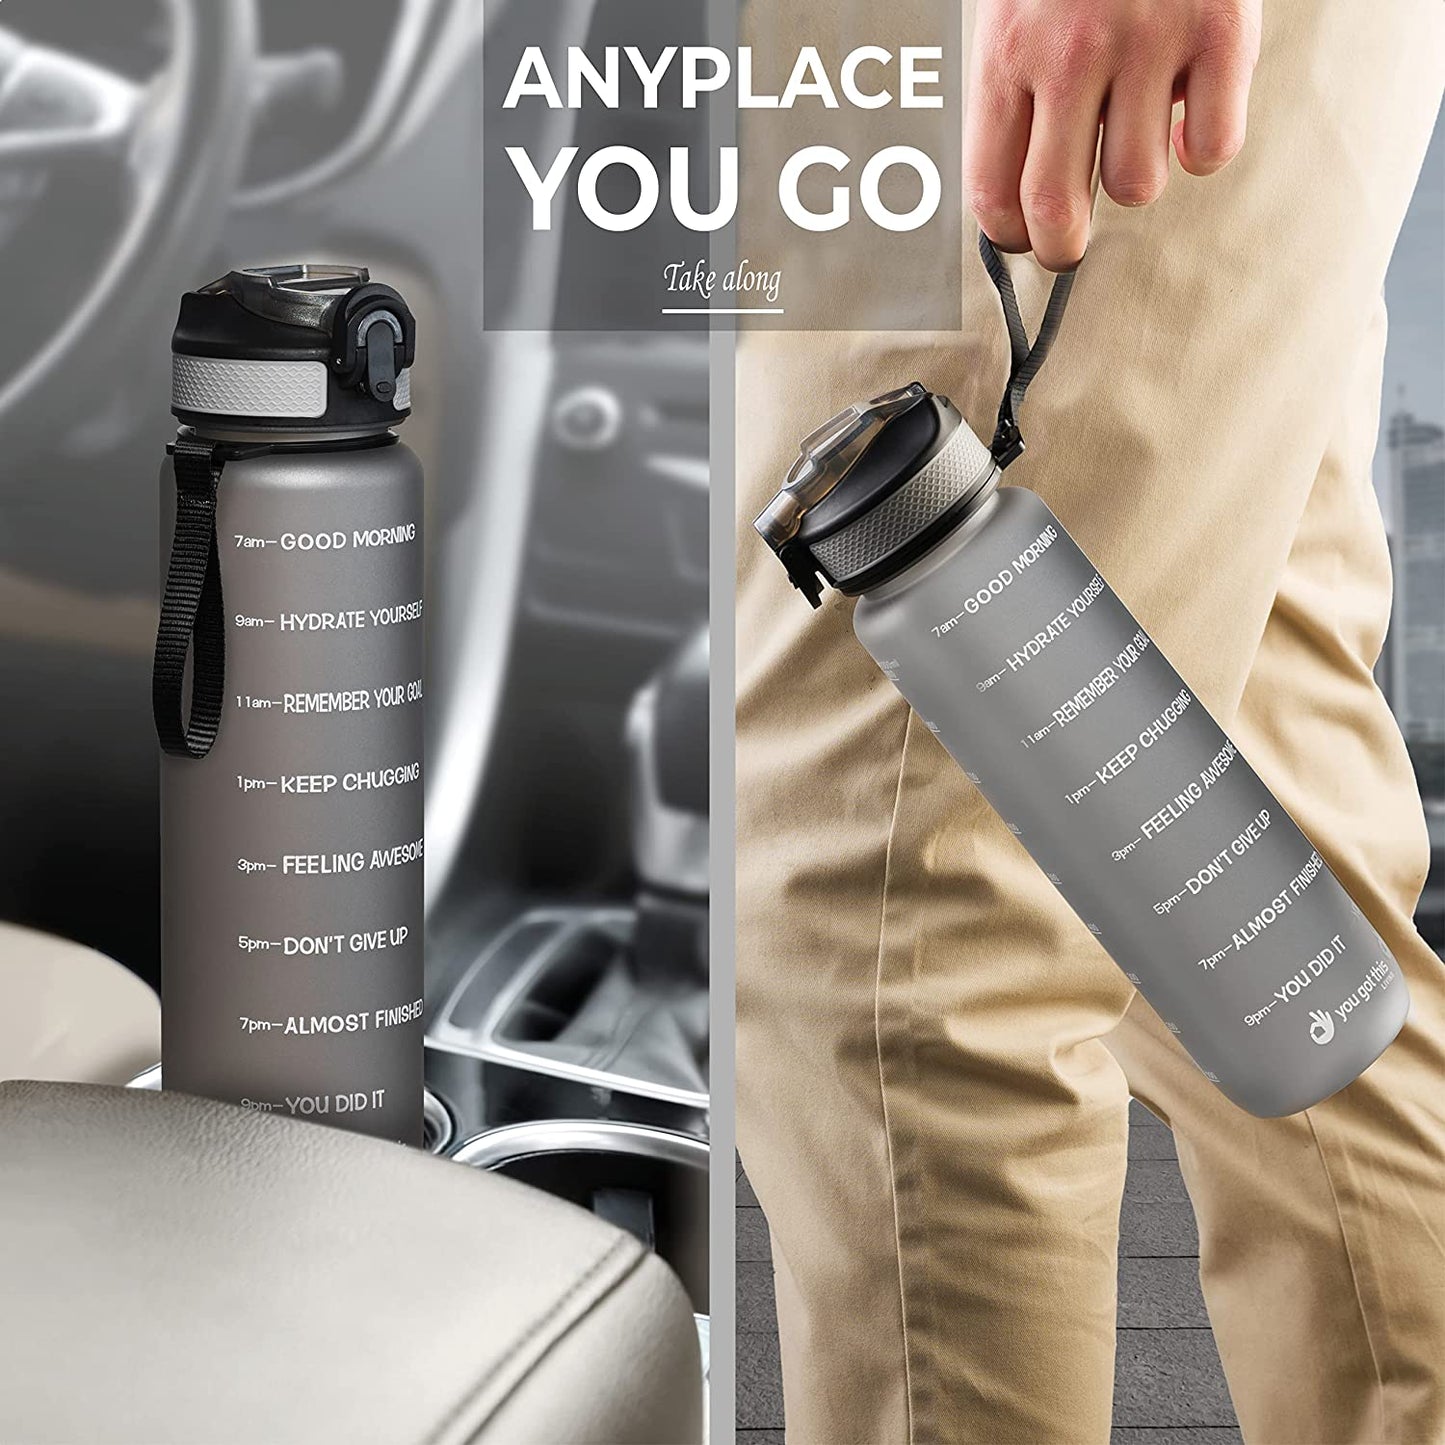 Motivational Water Bottle with Time Marker, 32 oz Water Bottle, Sports Water Bottle with Spout, Achieve All-Day Hydration SpillProof, BPA FREE